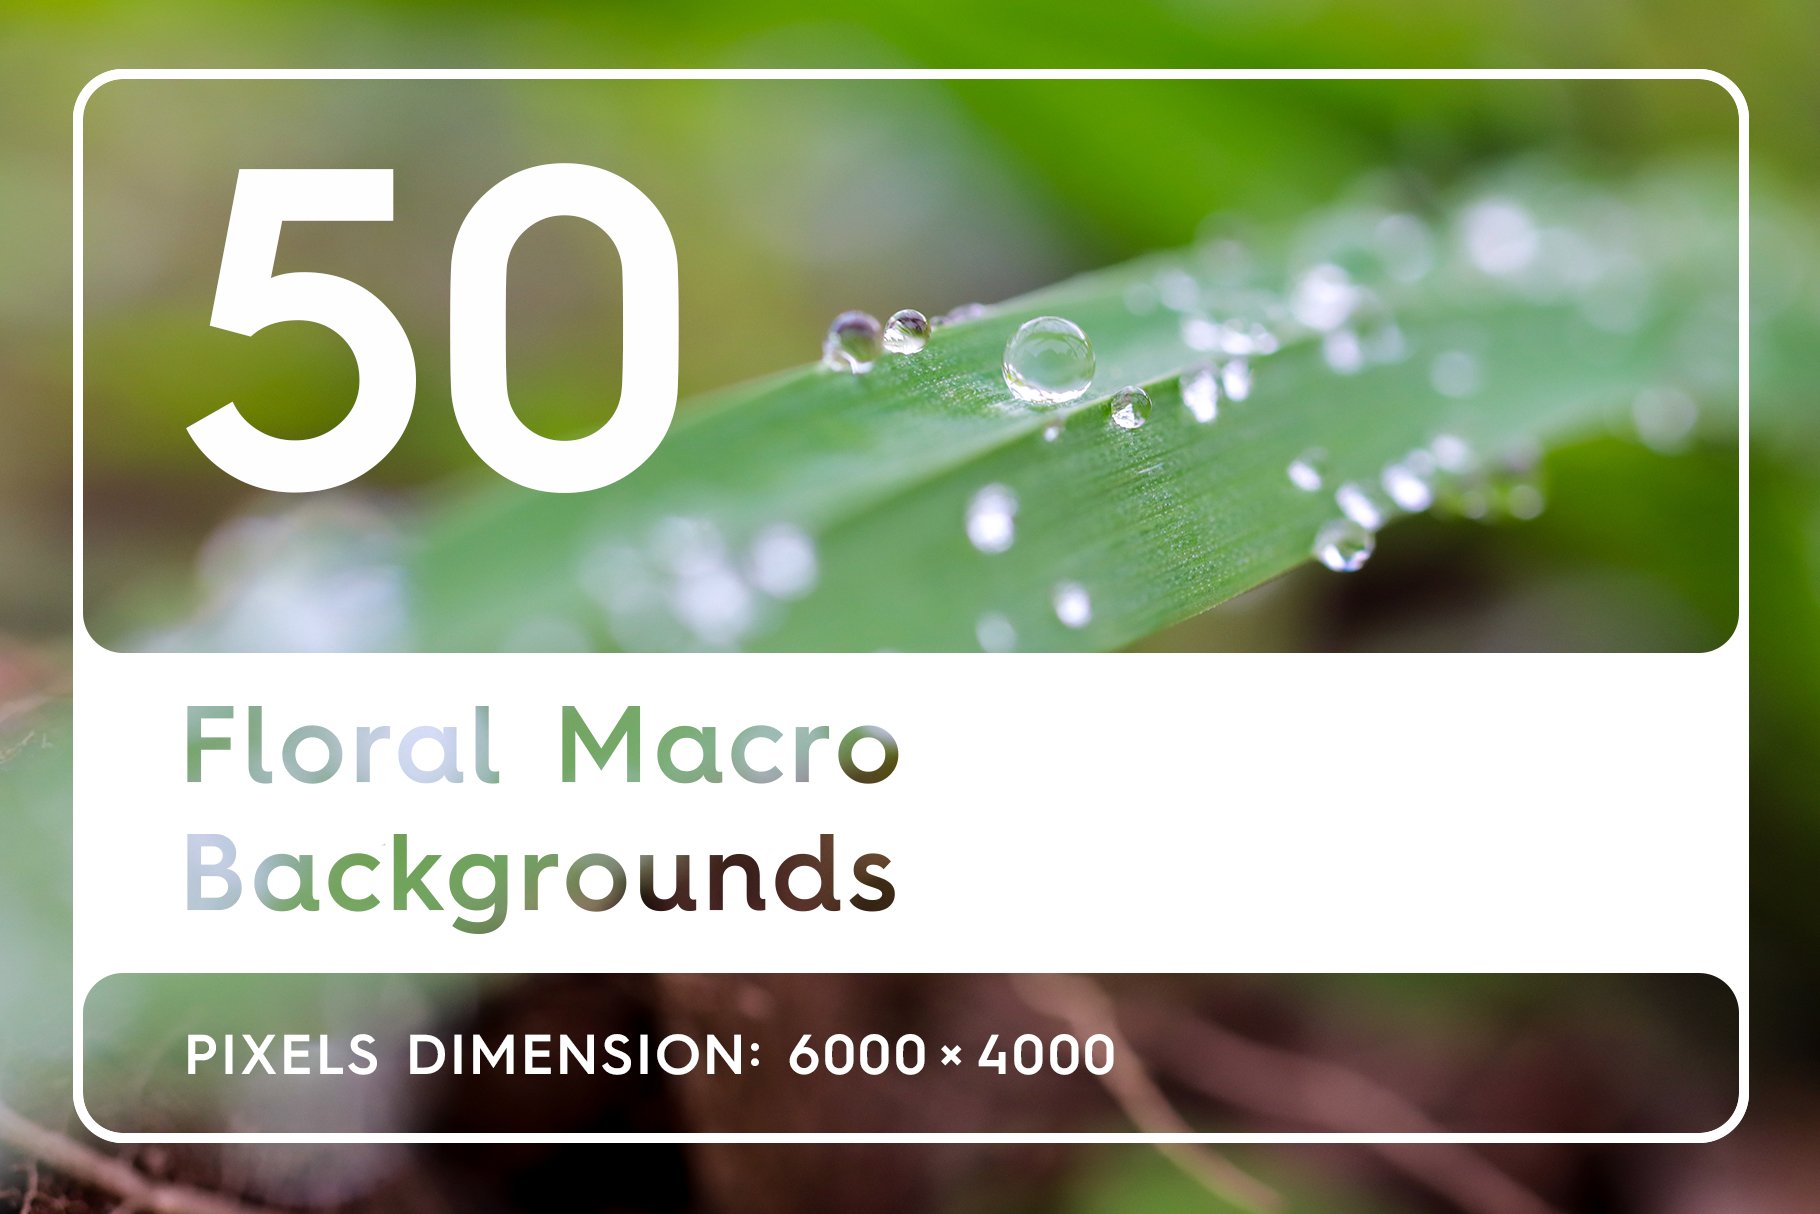 50 Floral Macro Backgrounds cover image.